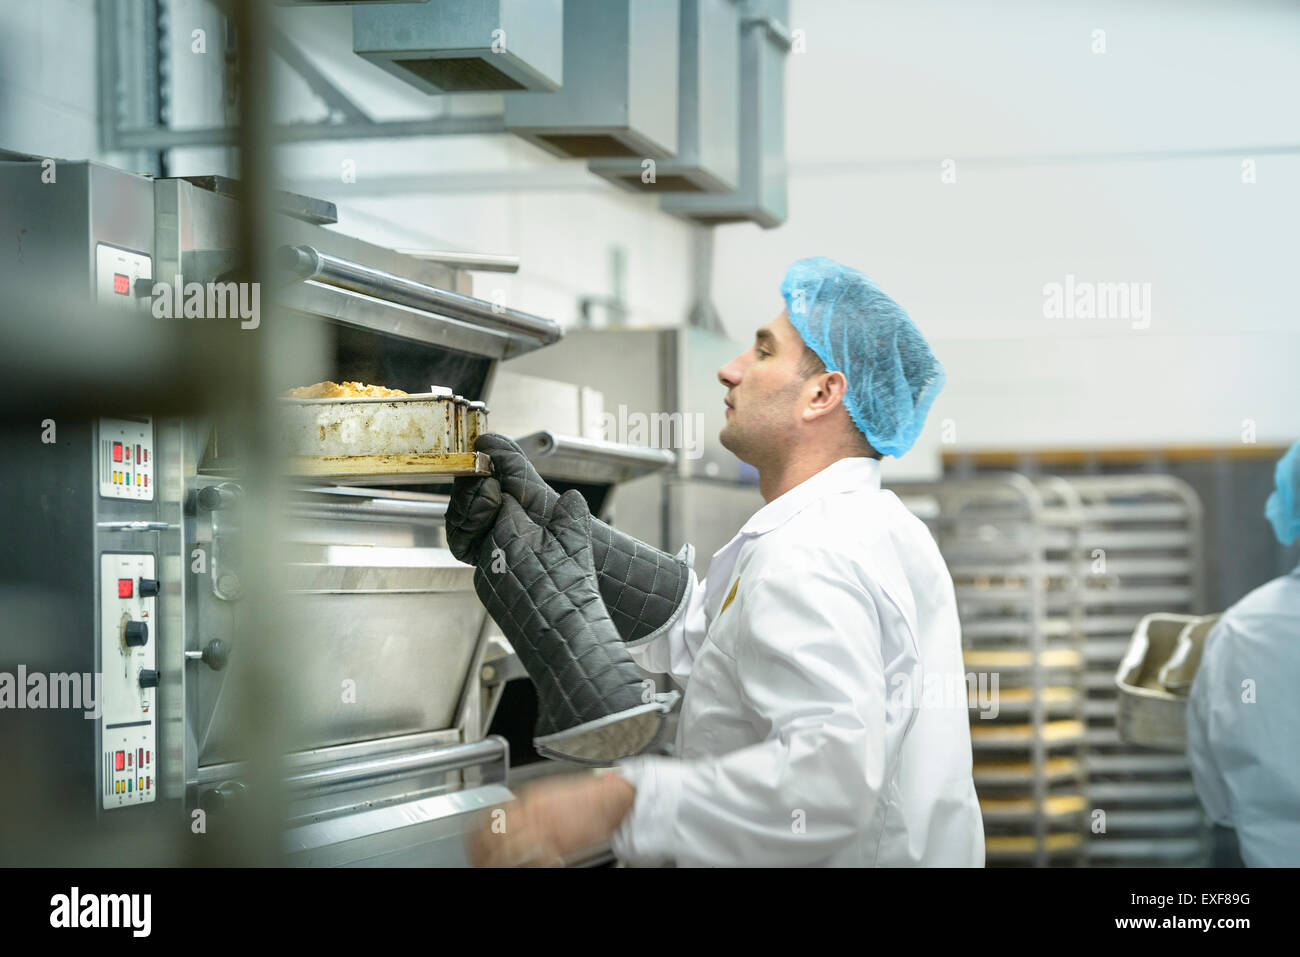 Baker inspecting cakes in oven in cake factory Stock Photo